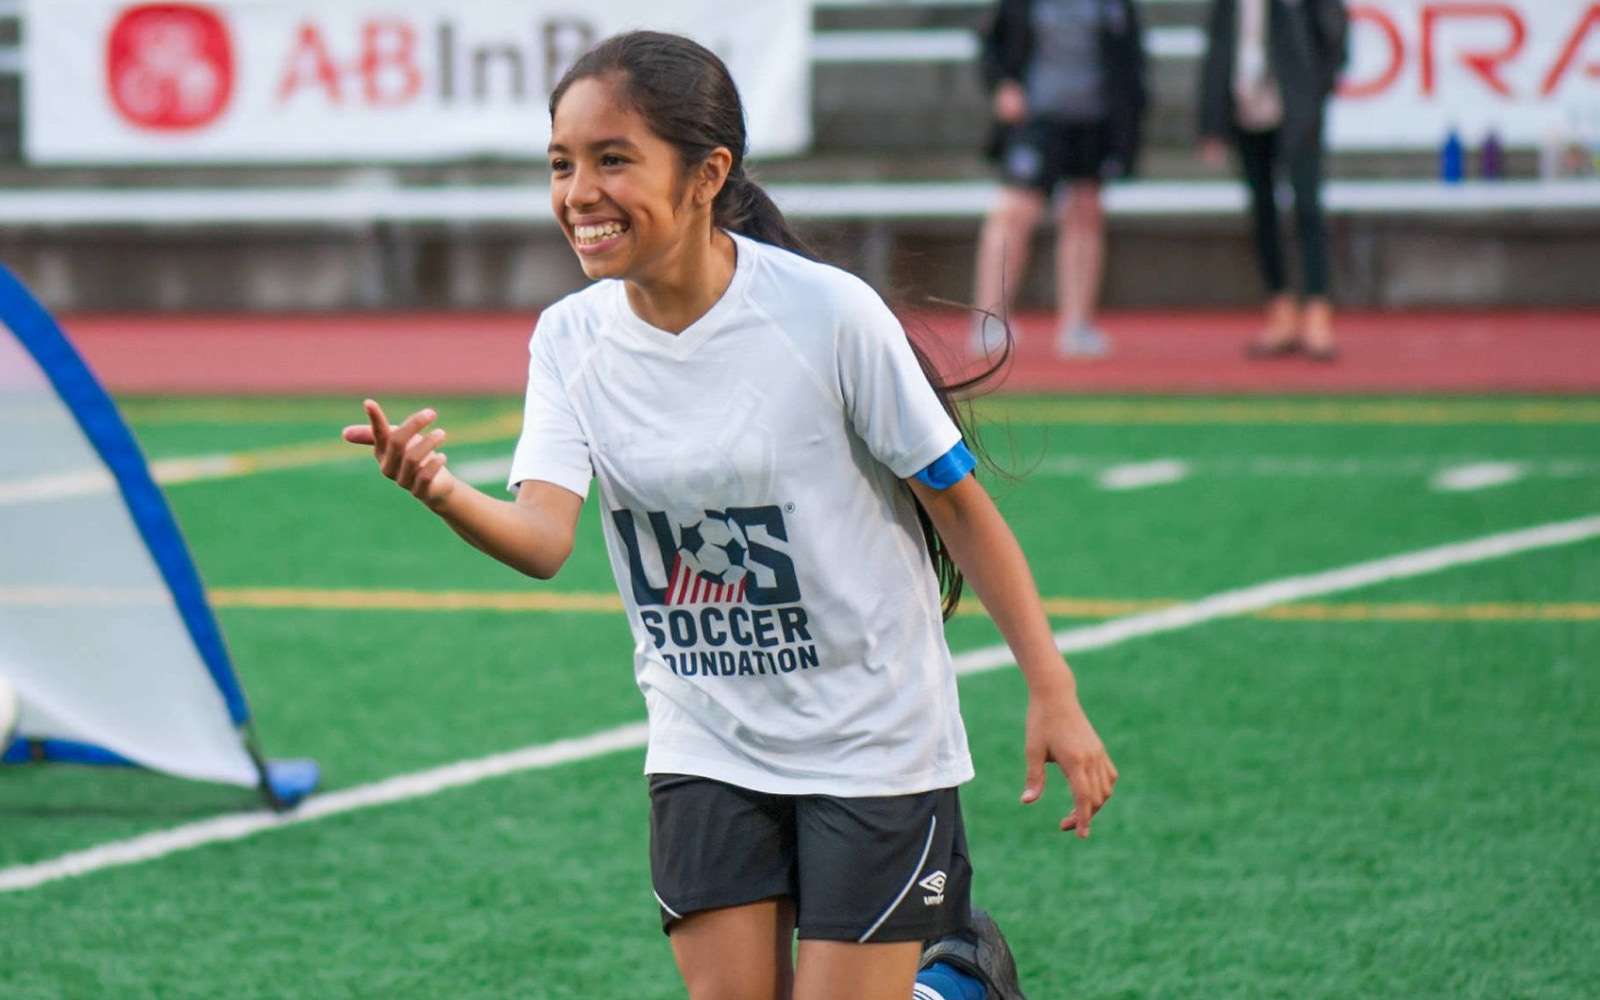 A middle-school-age, hispanic girl with olive skin and long, black hair in a pony-tail runs on a green soccer field. Her hair blows slightly in the wind and she has a big smile on her face. She points and is leaning forward as she plays soccer. Her shirt is white with the US Soccer Foundation logo printed on it. She has on navy shorts with a skinny, white stripe running alongside each thigh. One foot is lifted off the ground. She runs wearing black cleats and blue socks. A bright blue soccer net bleeds slightly into few on the right side of the image.